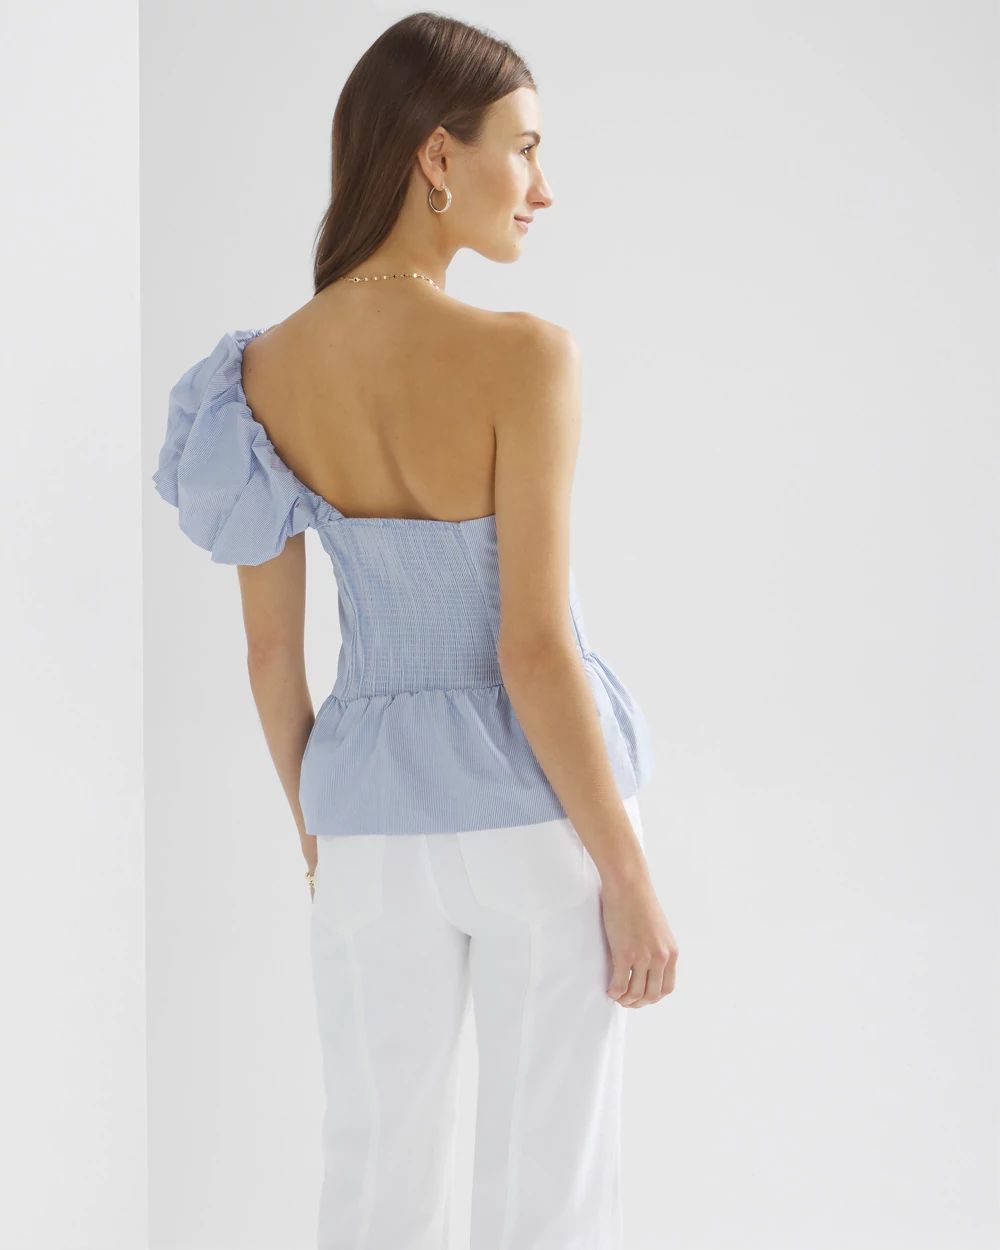 Off-the-Shoulder Asymmetrical Poplin Bustier click to view larger image.